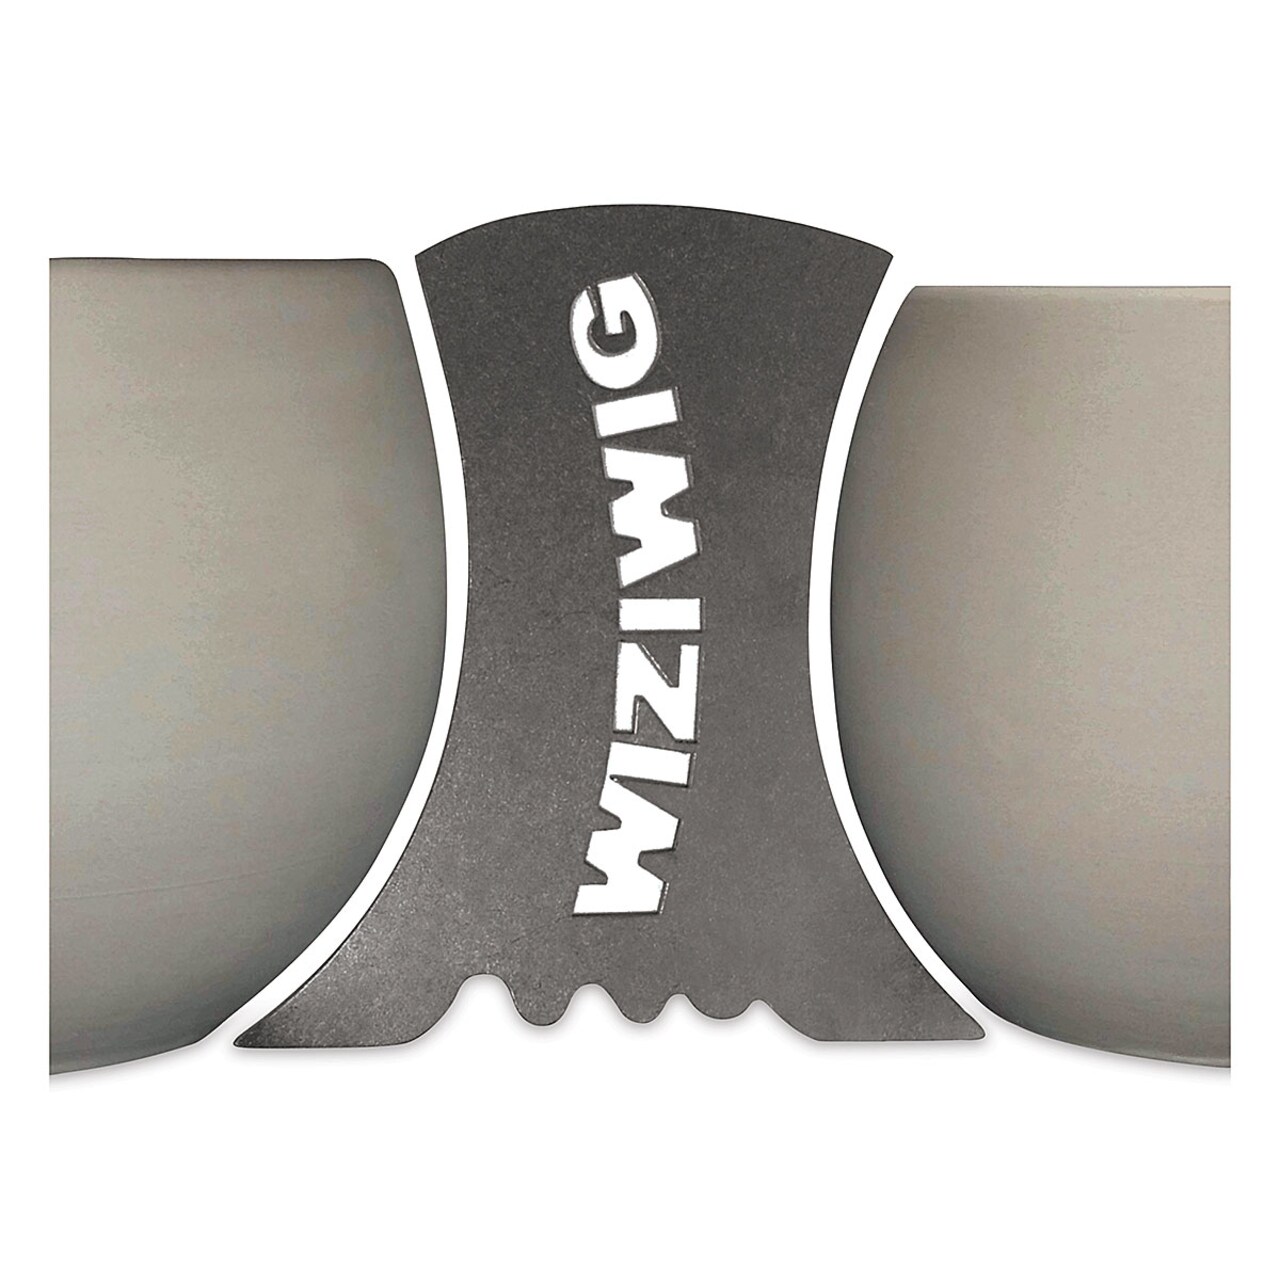 WiziWig Tools Profile Ribs - Goblet, Lucile